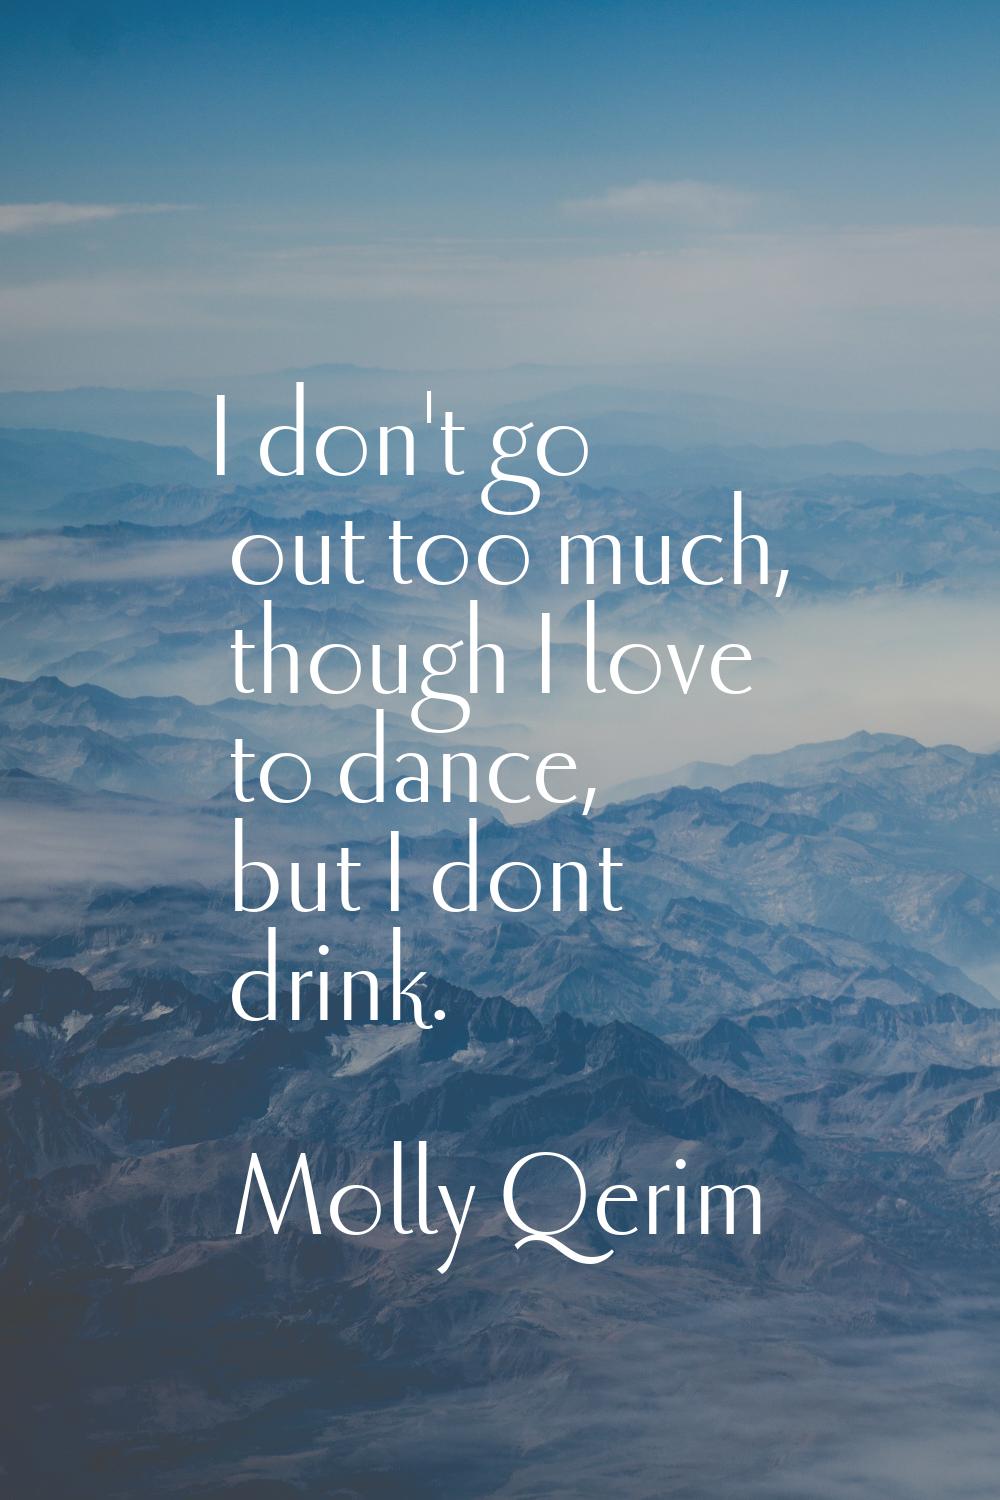 I don't go out too much, though I love to dance, but I dont drink.